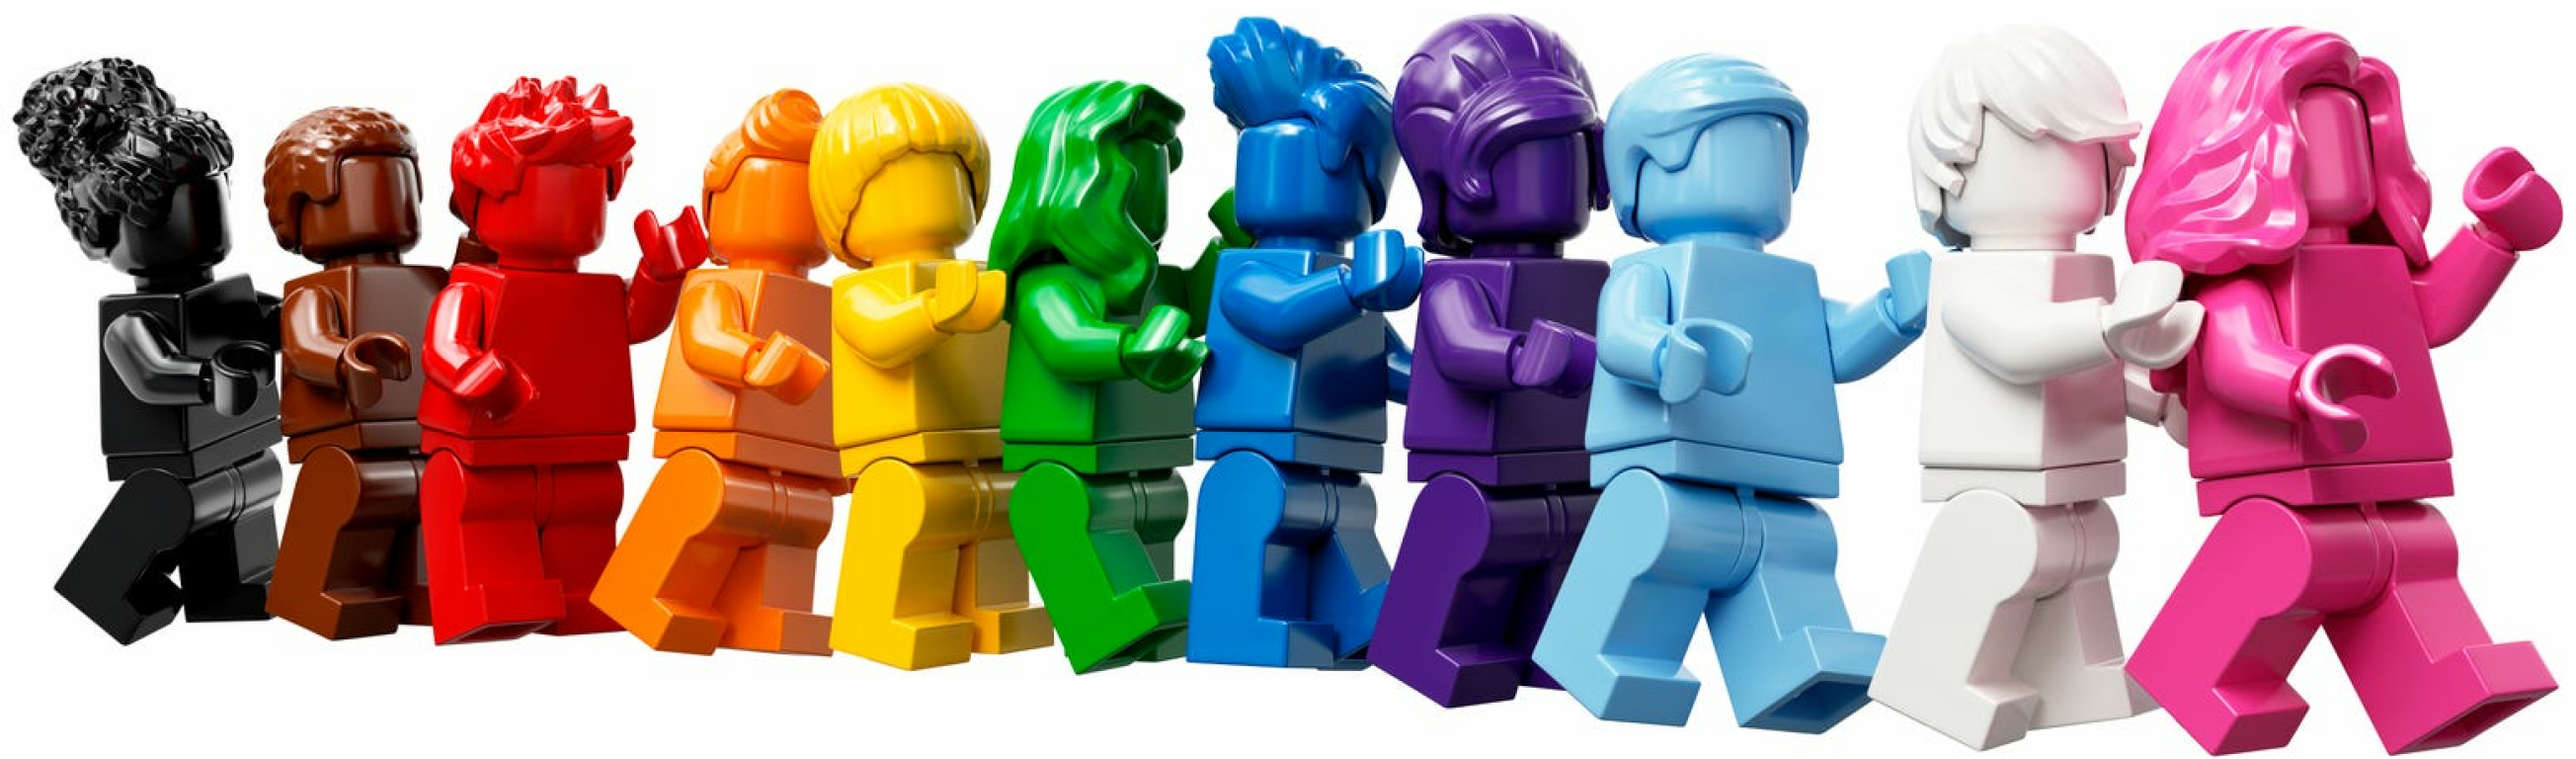 Everyone Is Awesome minifigures